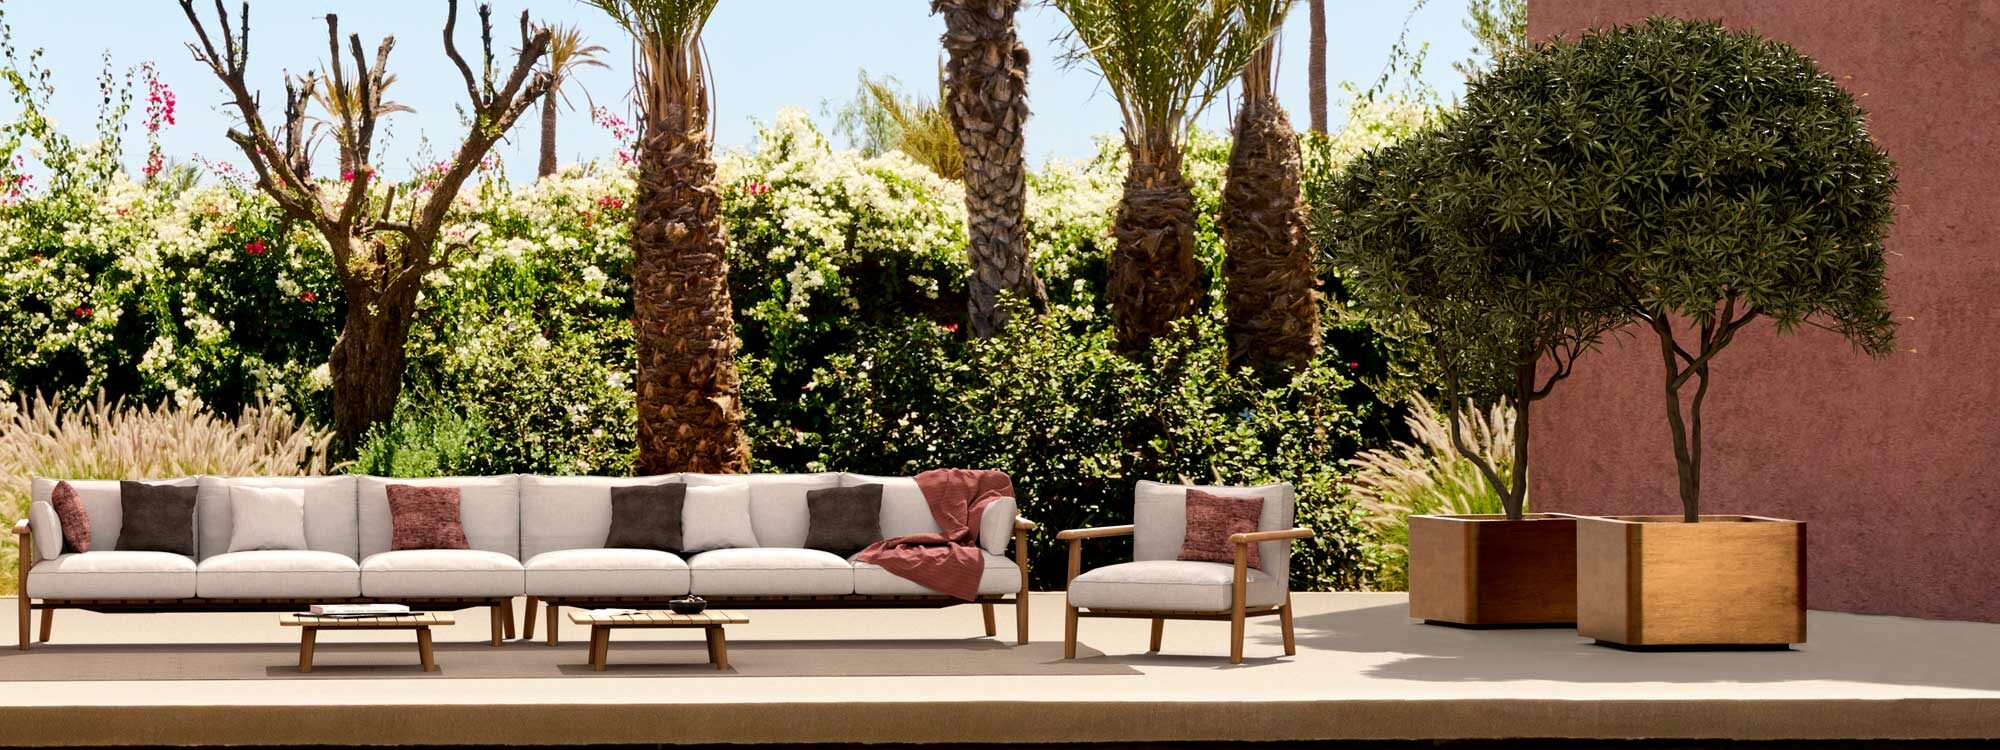 Image of large Mambo luxury garden sofa and Cuprum large cube planters, with palms and exotic trees in the background